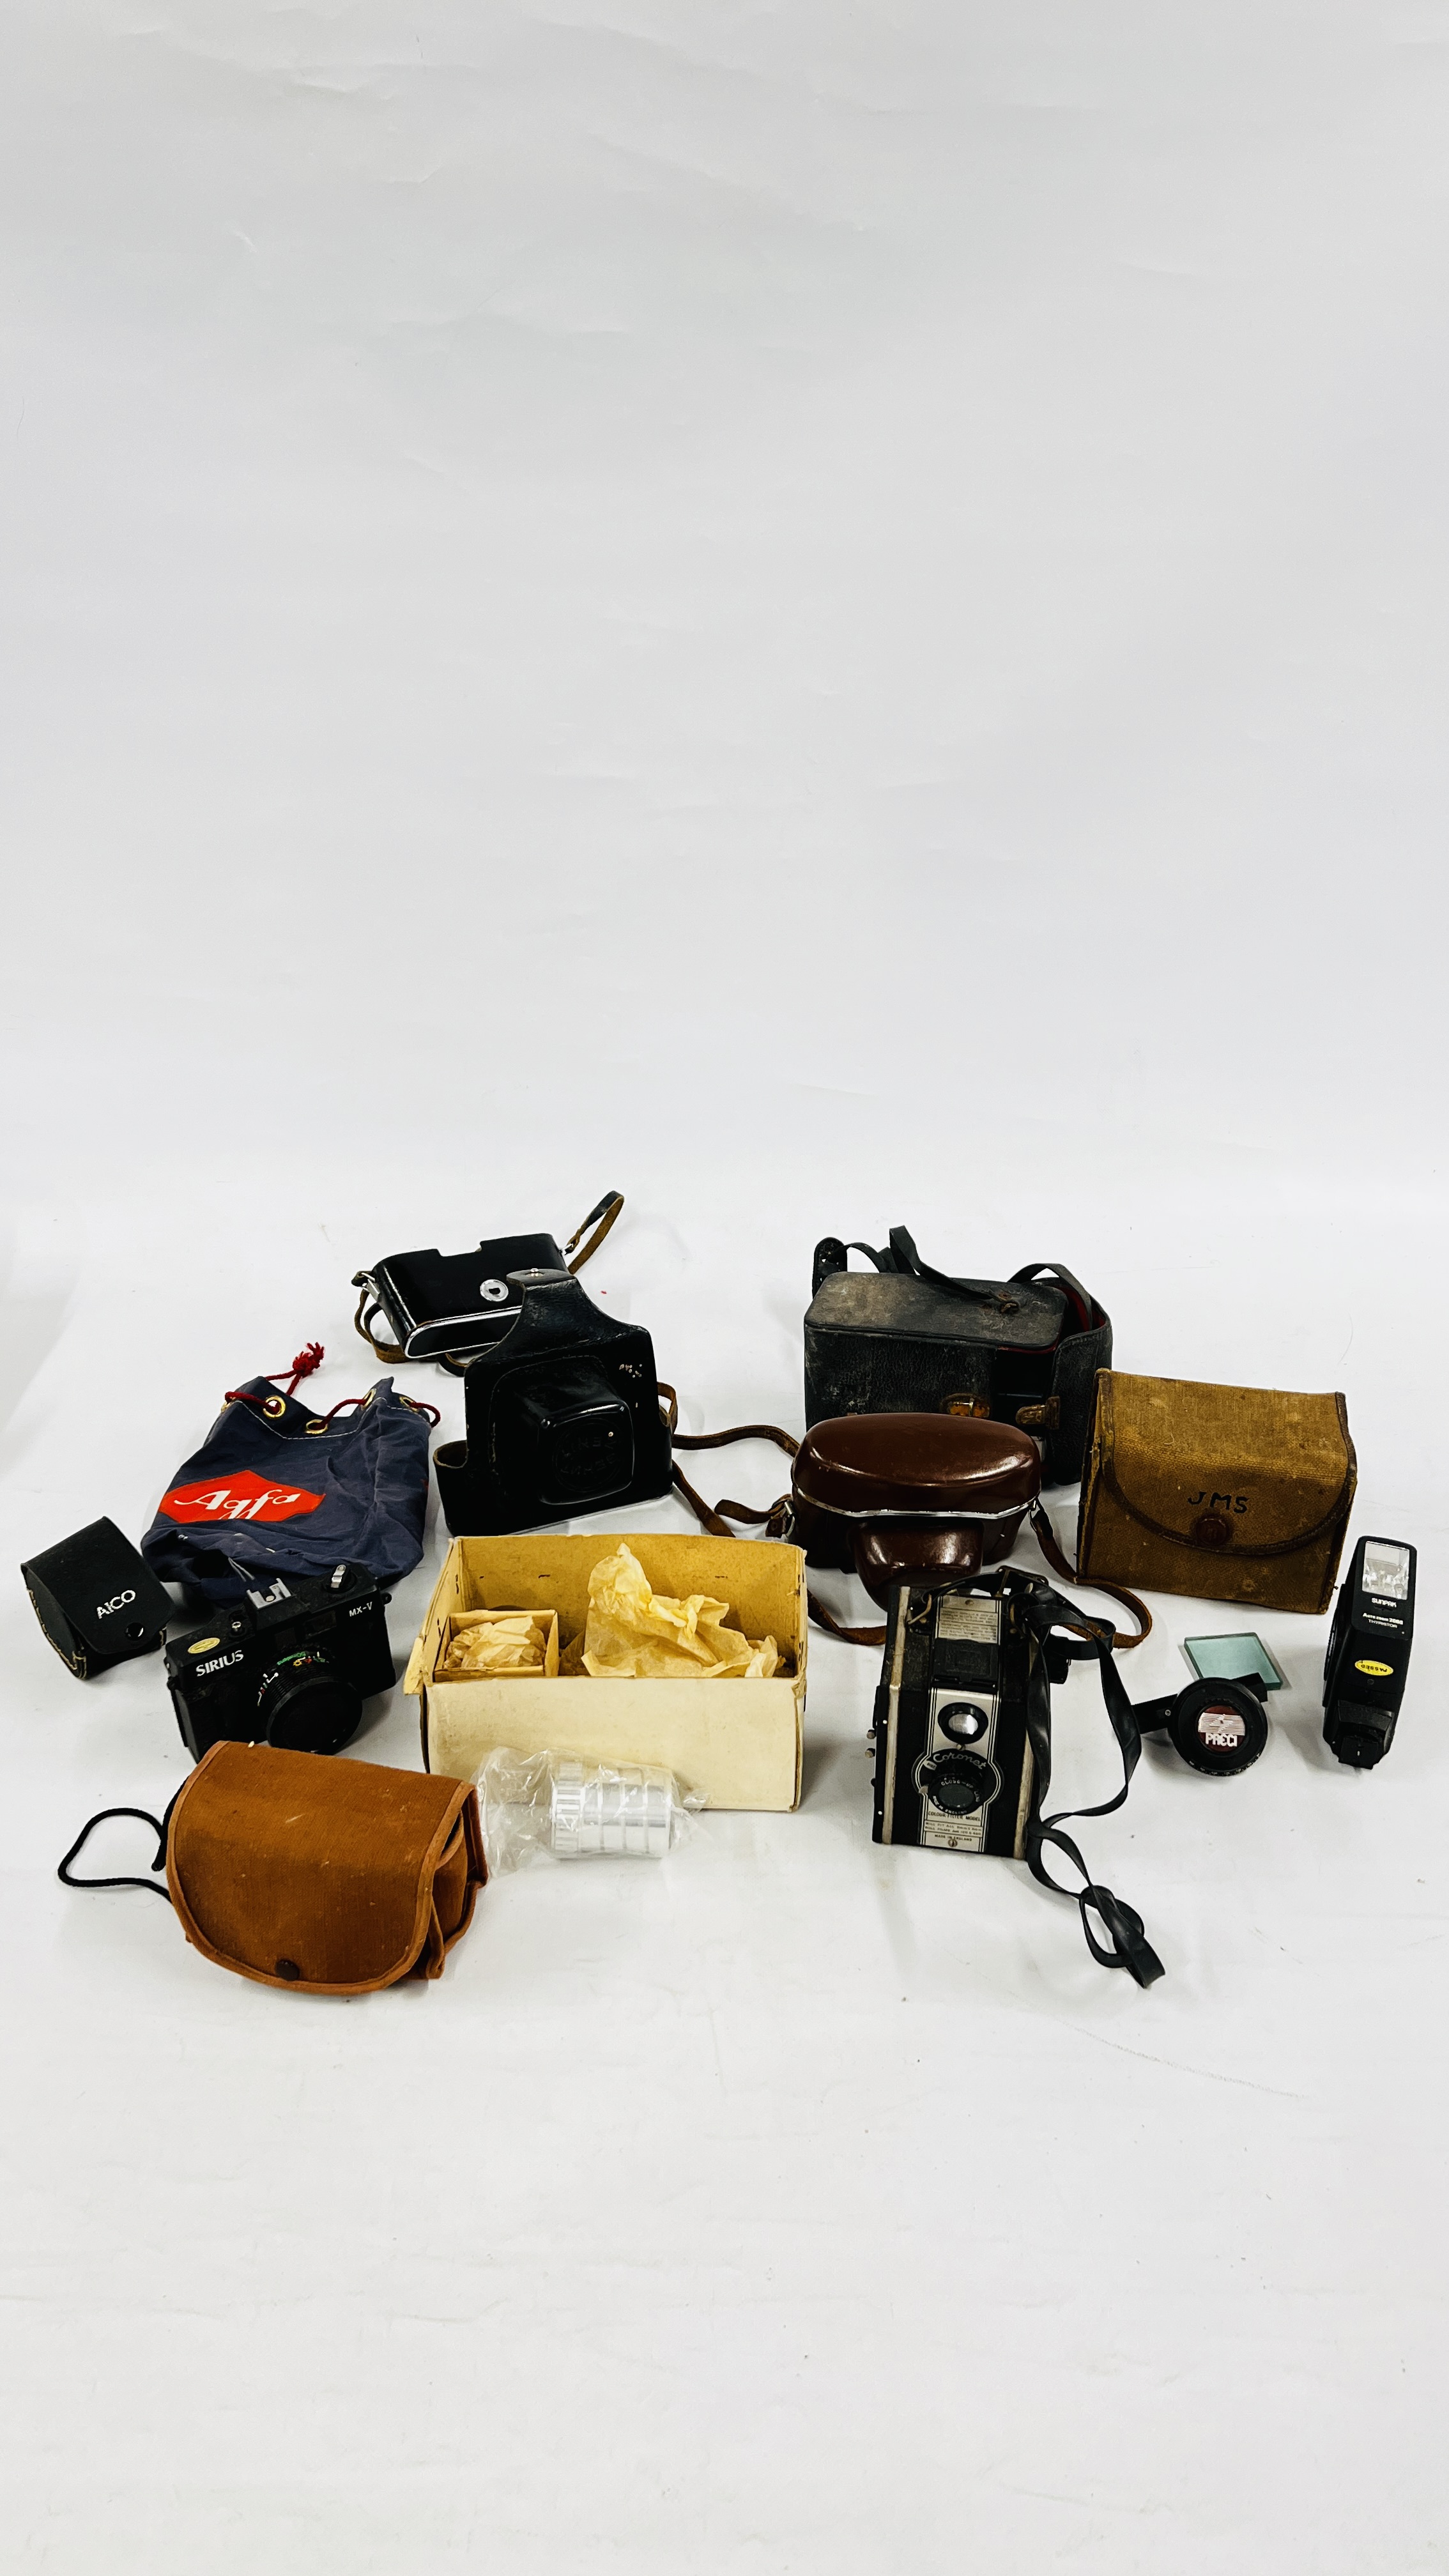 A BOX OF VINTAGE CAMERAS TO INCLUDE A KODAK BROWNIE 127, CORONET, YASHICA M612 6617 35MM CAMERA ETC.